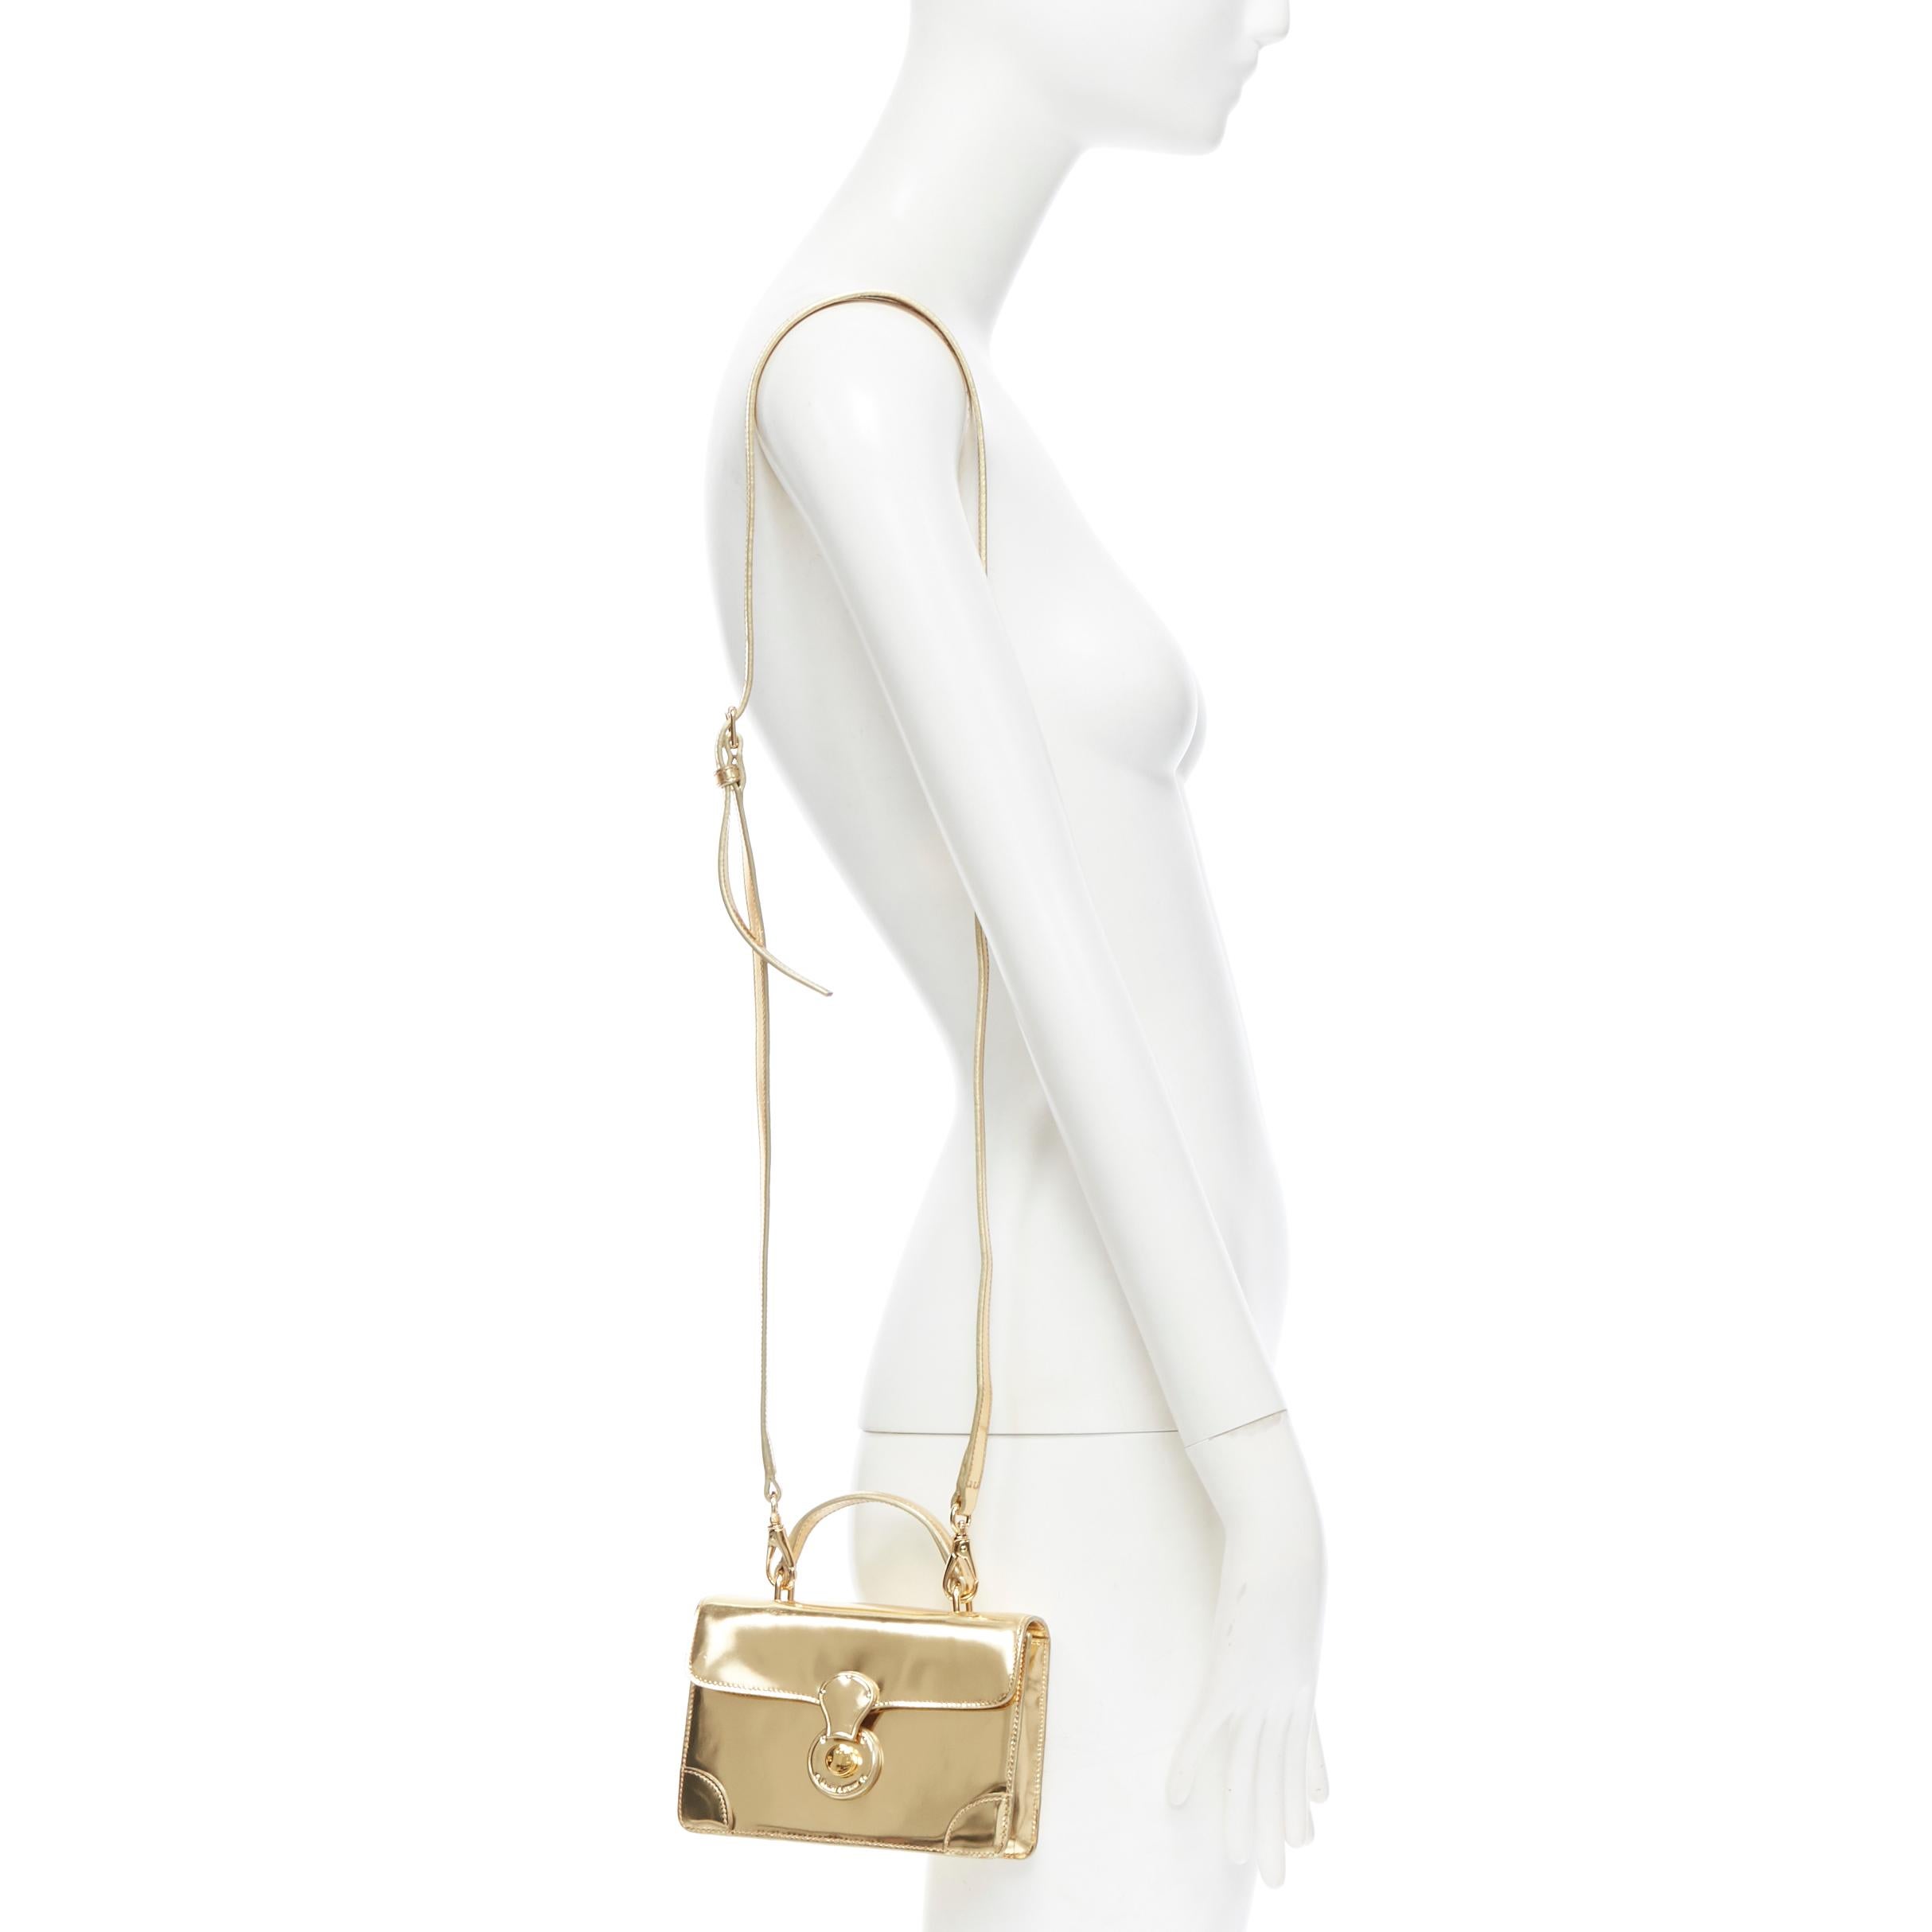 RALPH LAUREN Ricky mirrored gold lock flap leather crossbody small satchel bag Reference: LNKO/A01228 
Brand: Ralph Lauren 
Model: Ricky 
Material: Leather 
Color: Gold 
Pattern: Solid 
Closure: Clasp 
Extra Detail: Removable shoulder strap. Lock